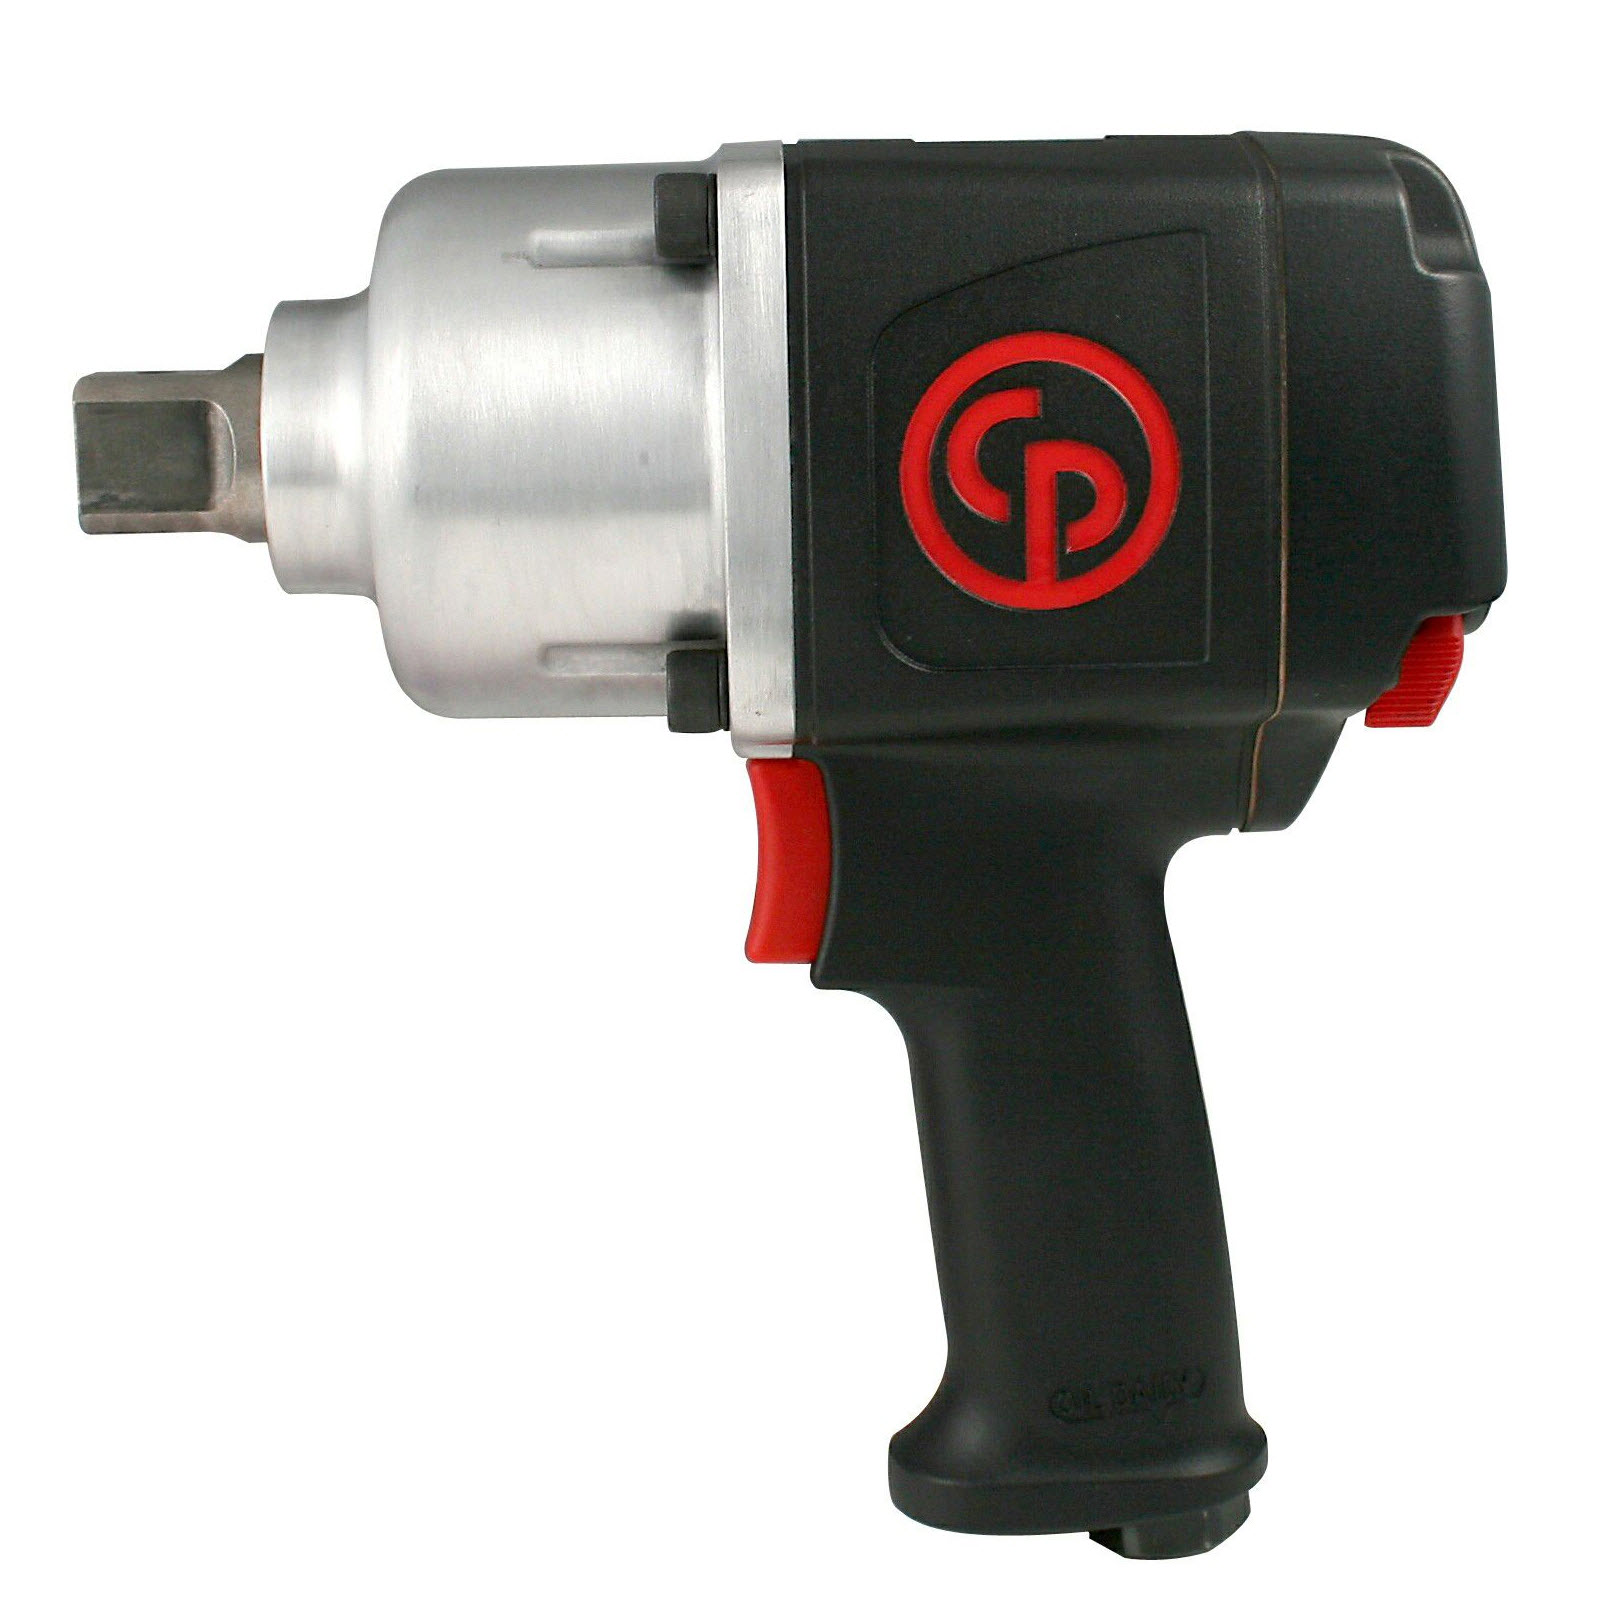 Chicago Pneumatic 3/4 in. Impact Wrench